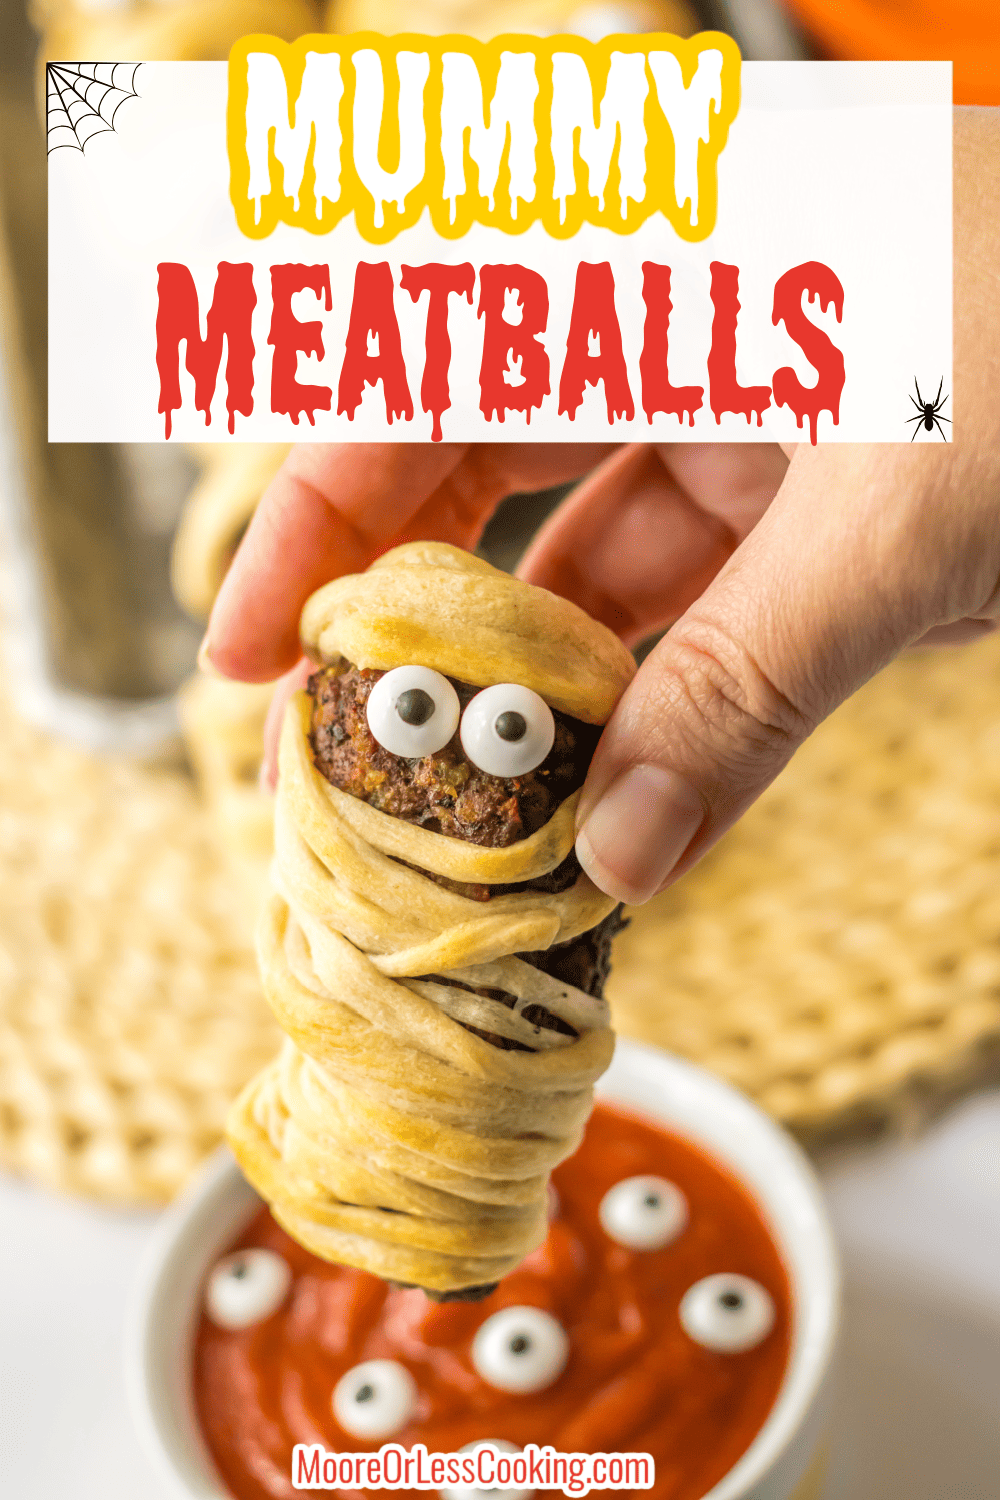 Easy to make and fun to assemble and decorate, these Mummy Meatballs are kid-friendly and perfect for Halloween parties. Kids will want to help wrap the mummy meatballs with the crescent dough "bandages" and will gobble these savory treats up once they're fully cooked. Serve them with a marinara dipping sauce for a crowd-pleasing dish. via @Mooreorlesscook